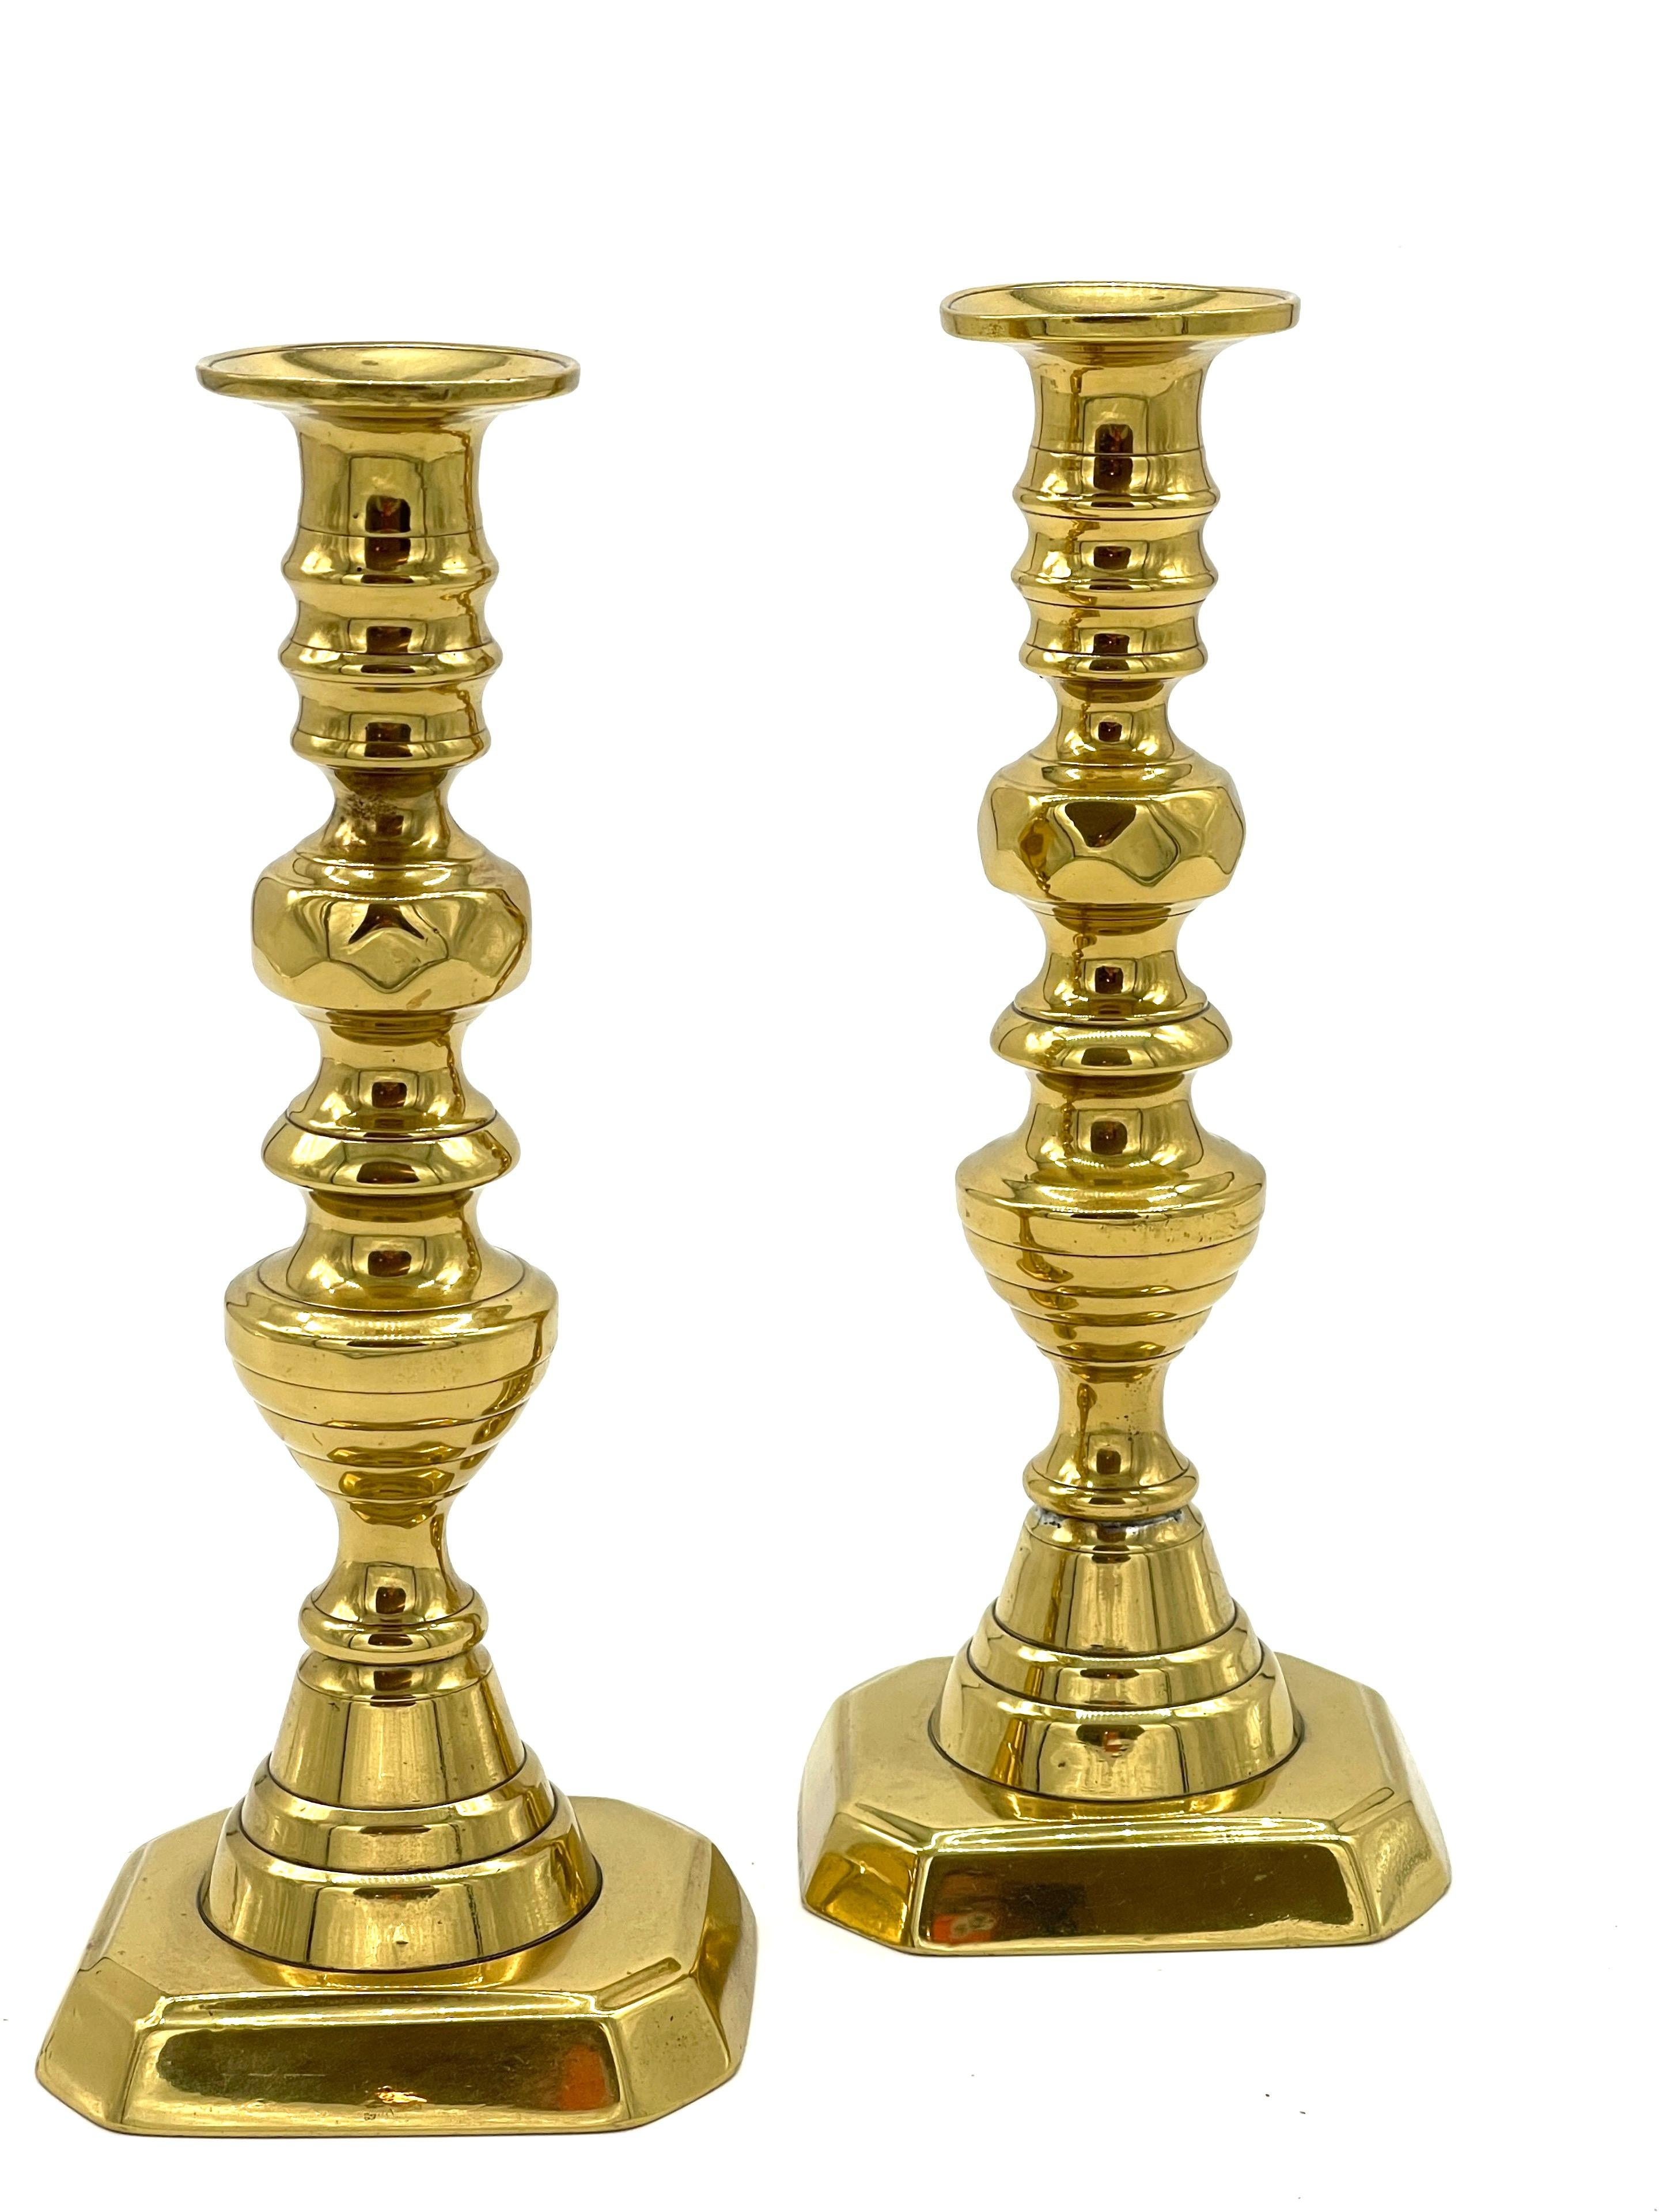 Pair of  19th C. English Brass Beehive Push Up Candlesticks 
England, Circa 1880s

Add a touch of history and elegance to your home with this pair of 19th century English brass beehivepush up candlesticks, originating from England in the 1880s.